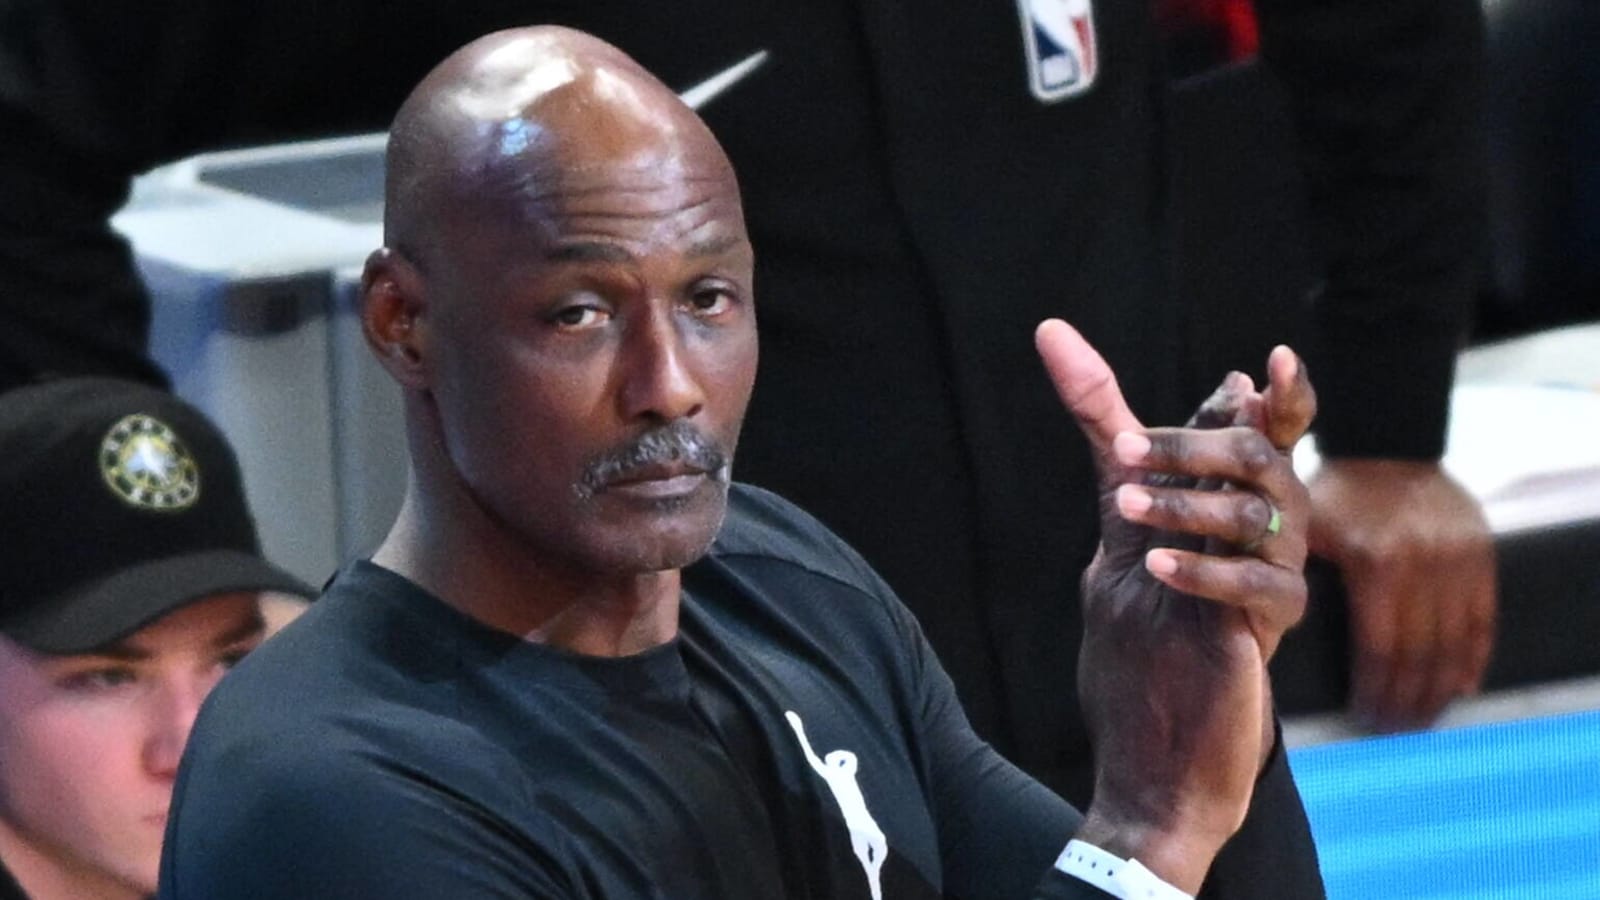 League faces criticism for including Karl Malone in AS Weekend